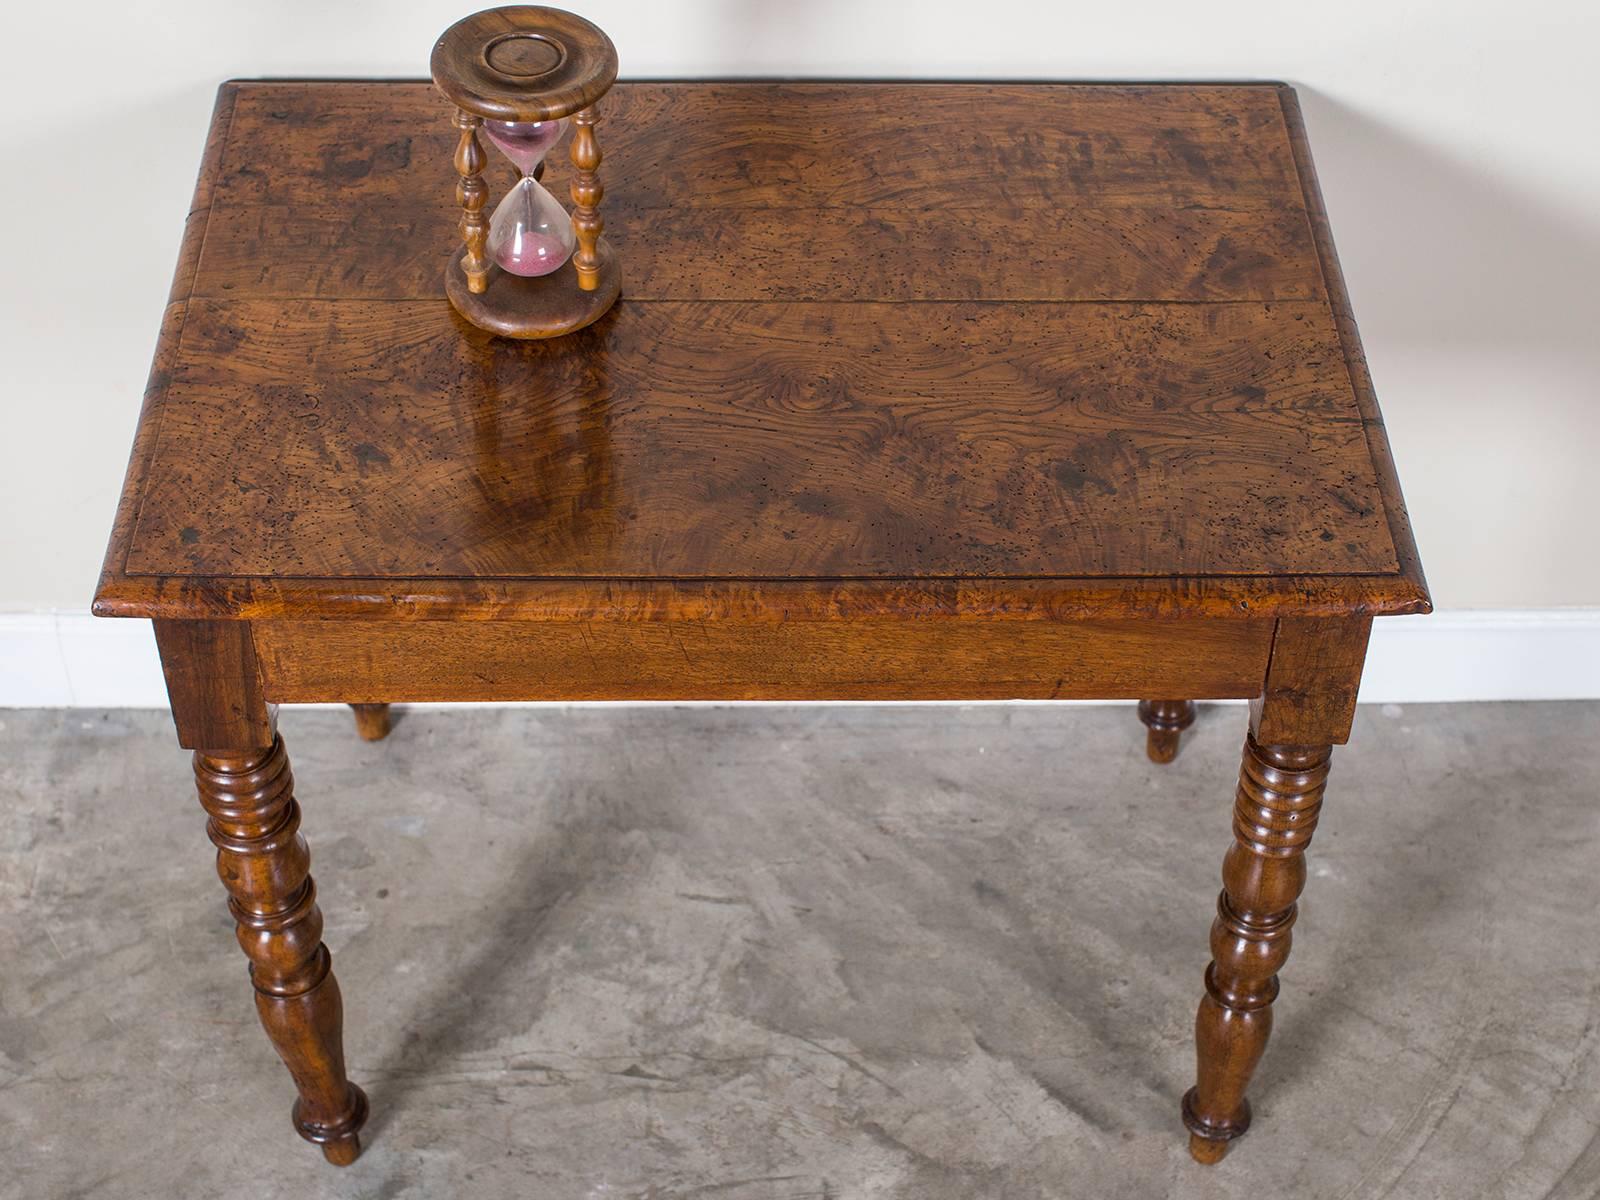 Mid-19th Century Antique French Louis Philippe Burl Chestnut Table with Drawer, circa 1850